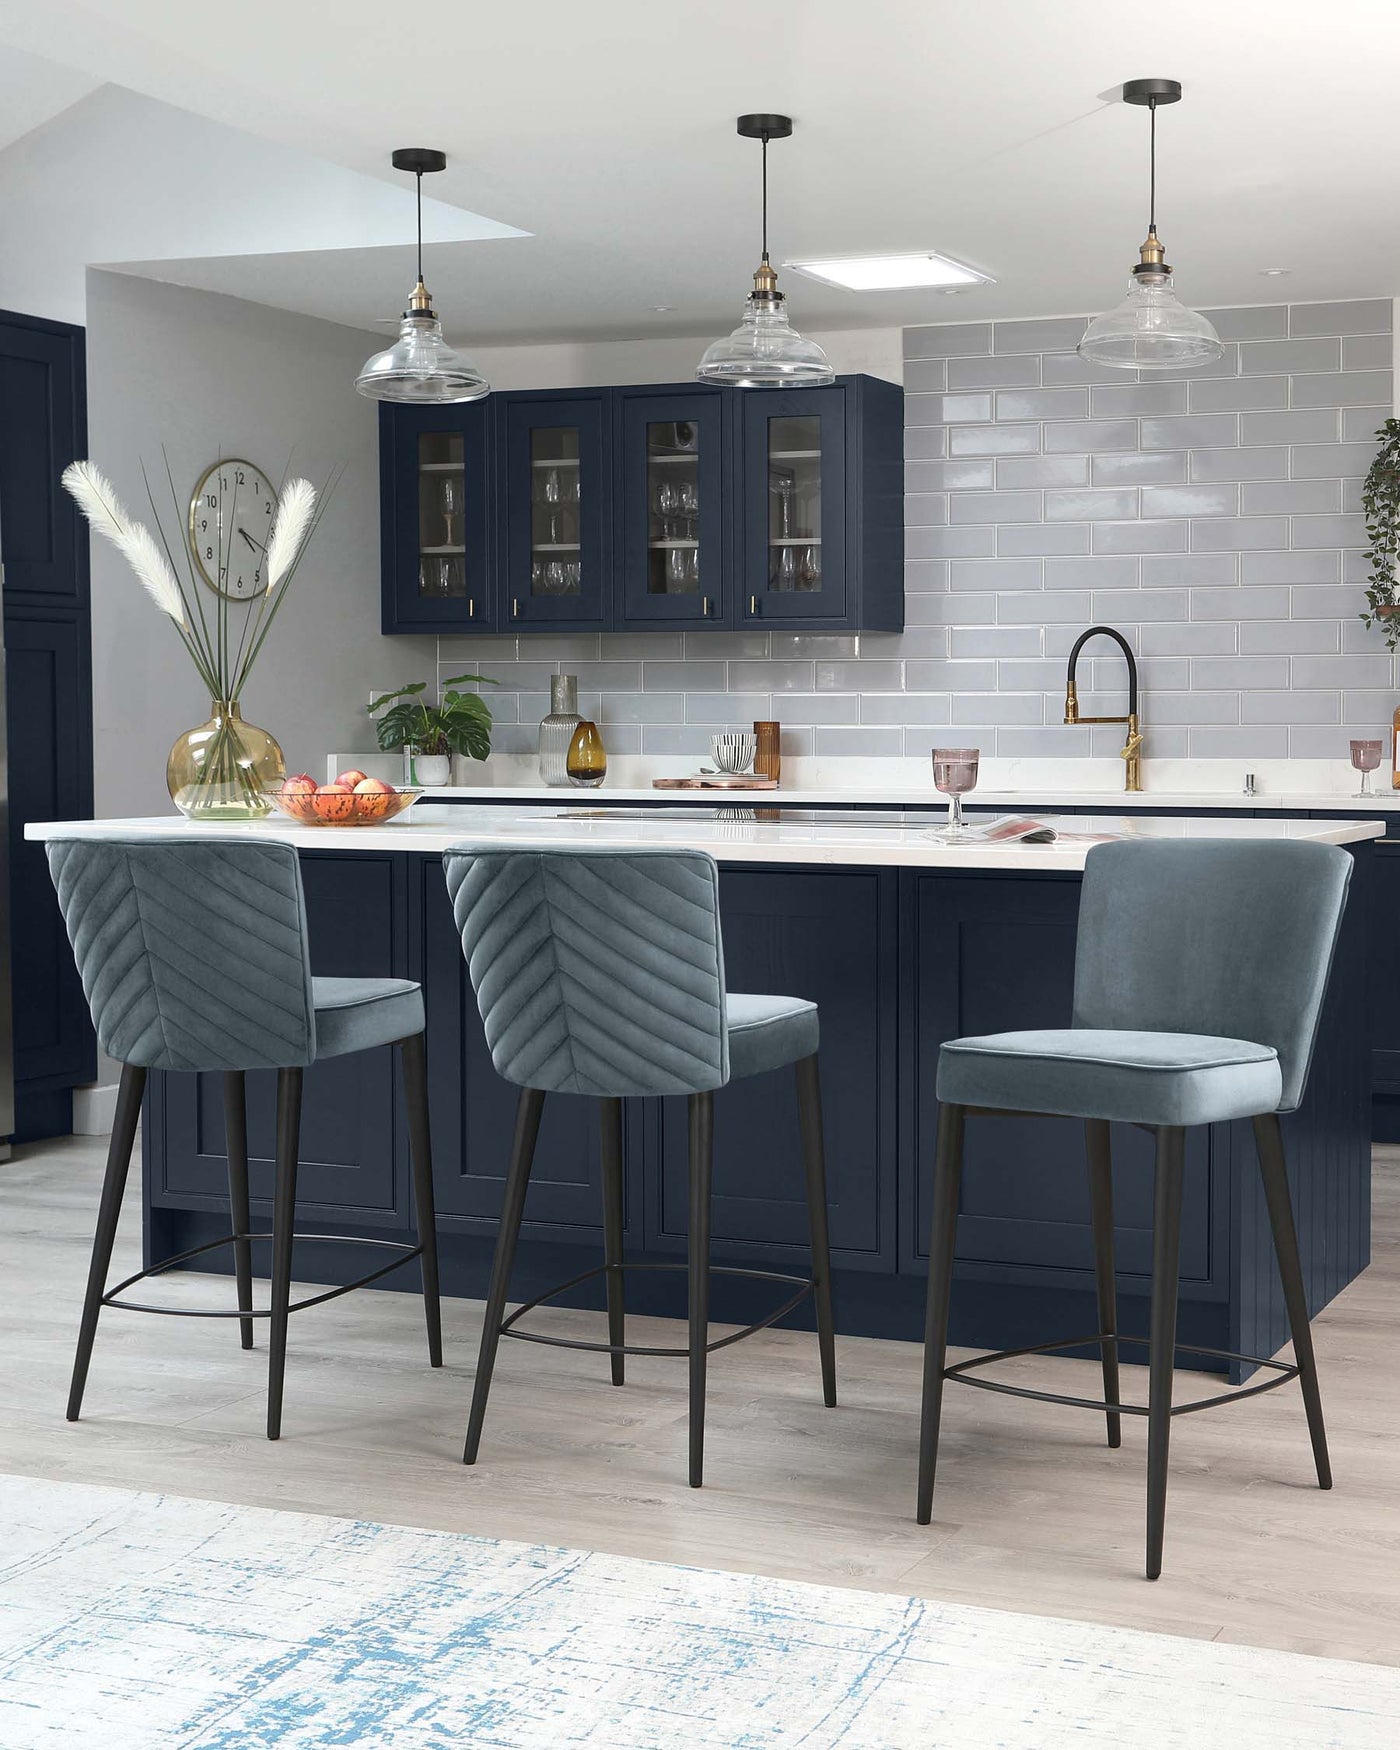 Three elegant bar stools with plush, channel-tufted velvet upholstery in a soft grey colour. Each stool has a high backrest and rests on slender, black metal legs with footrest bars, complementing a modern kitchen island setting.